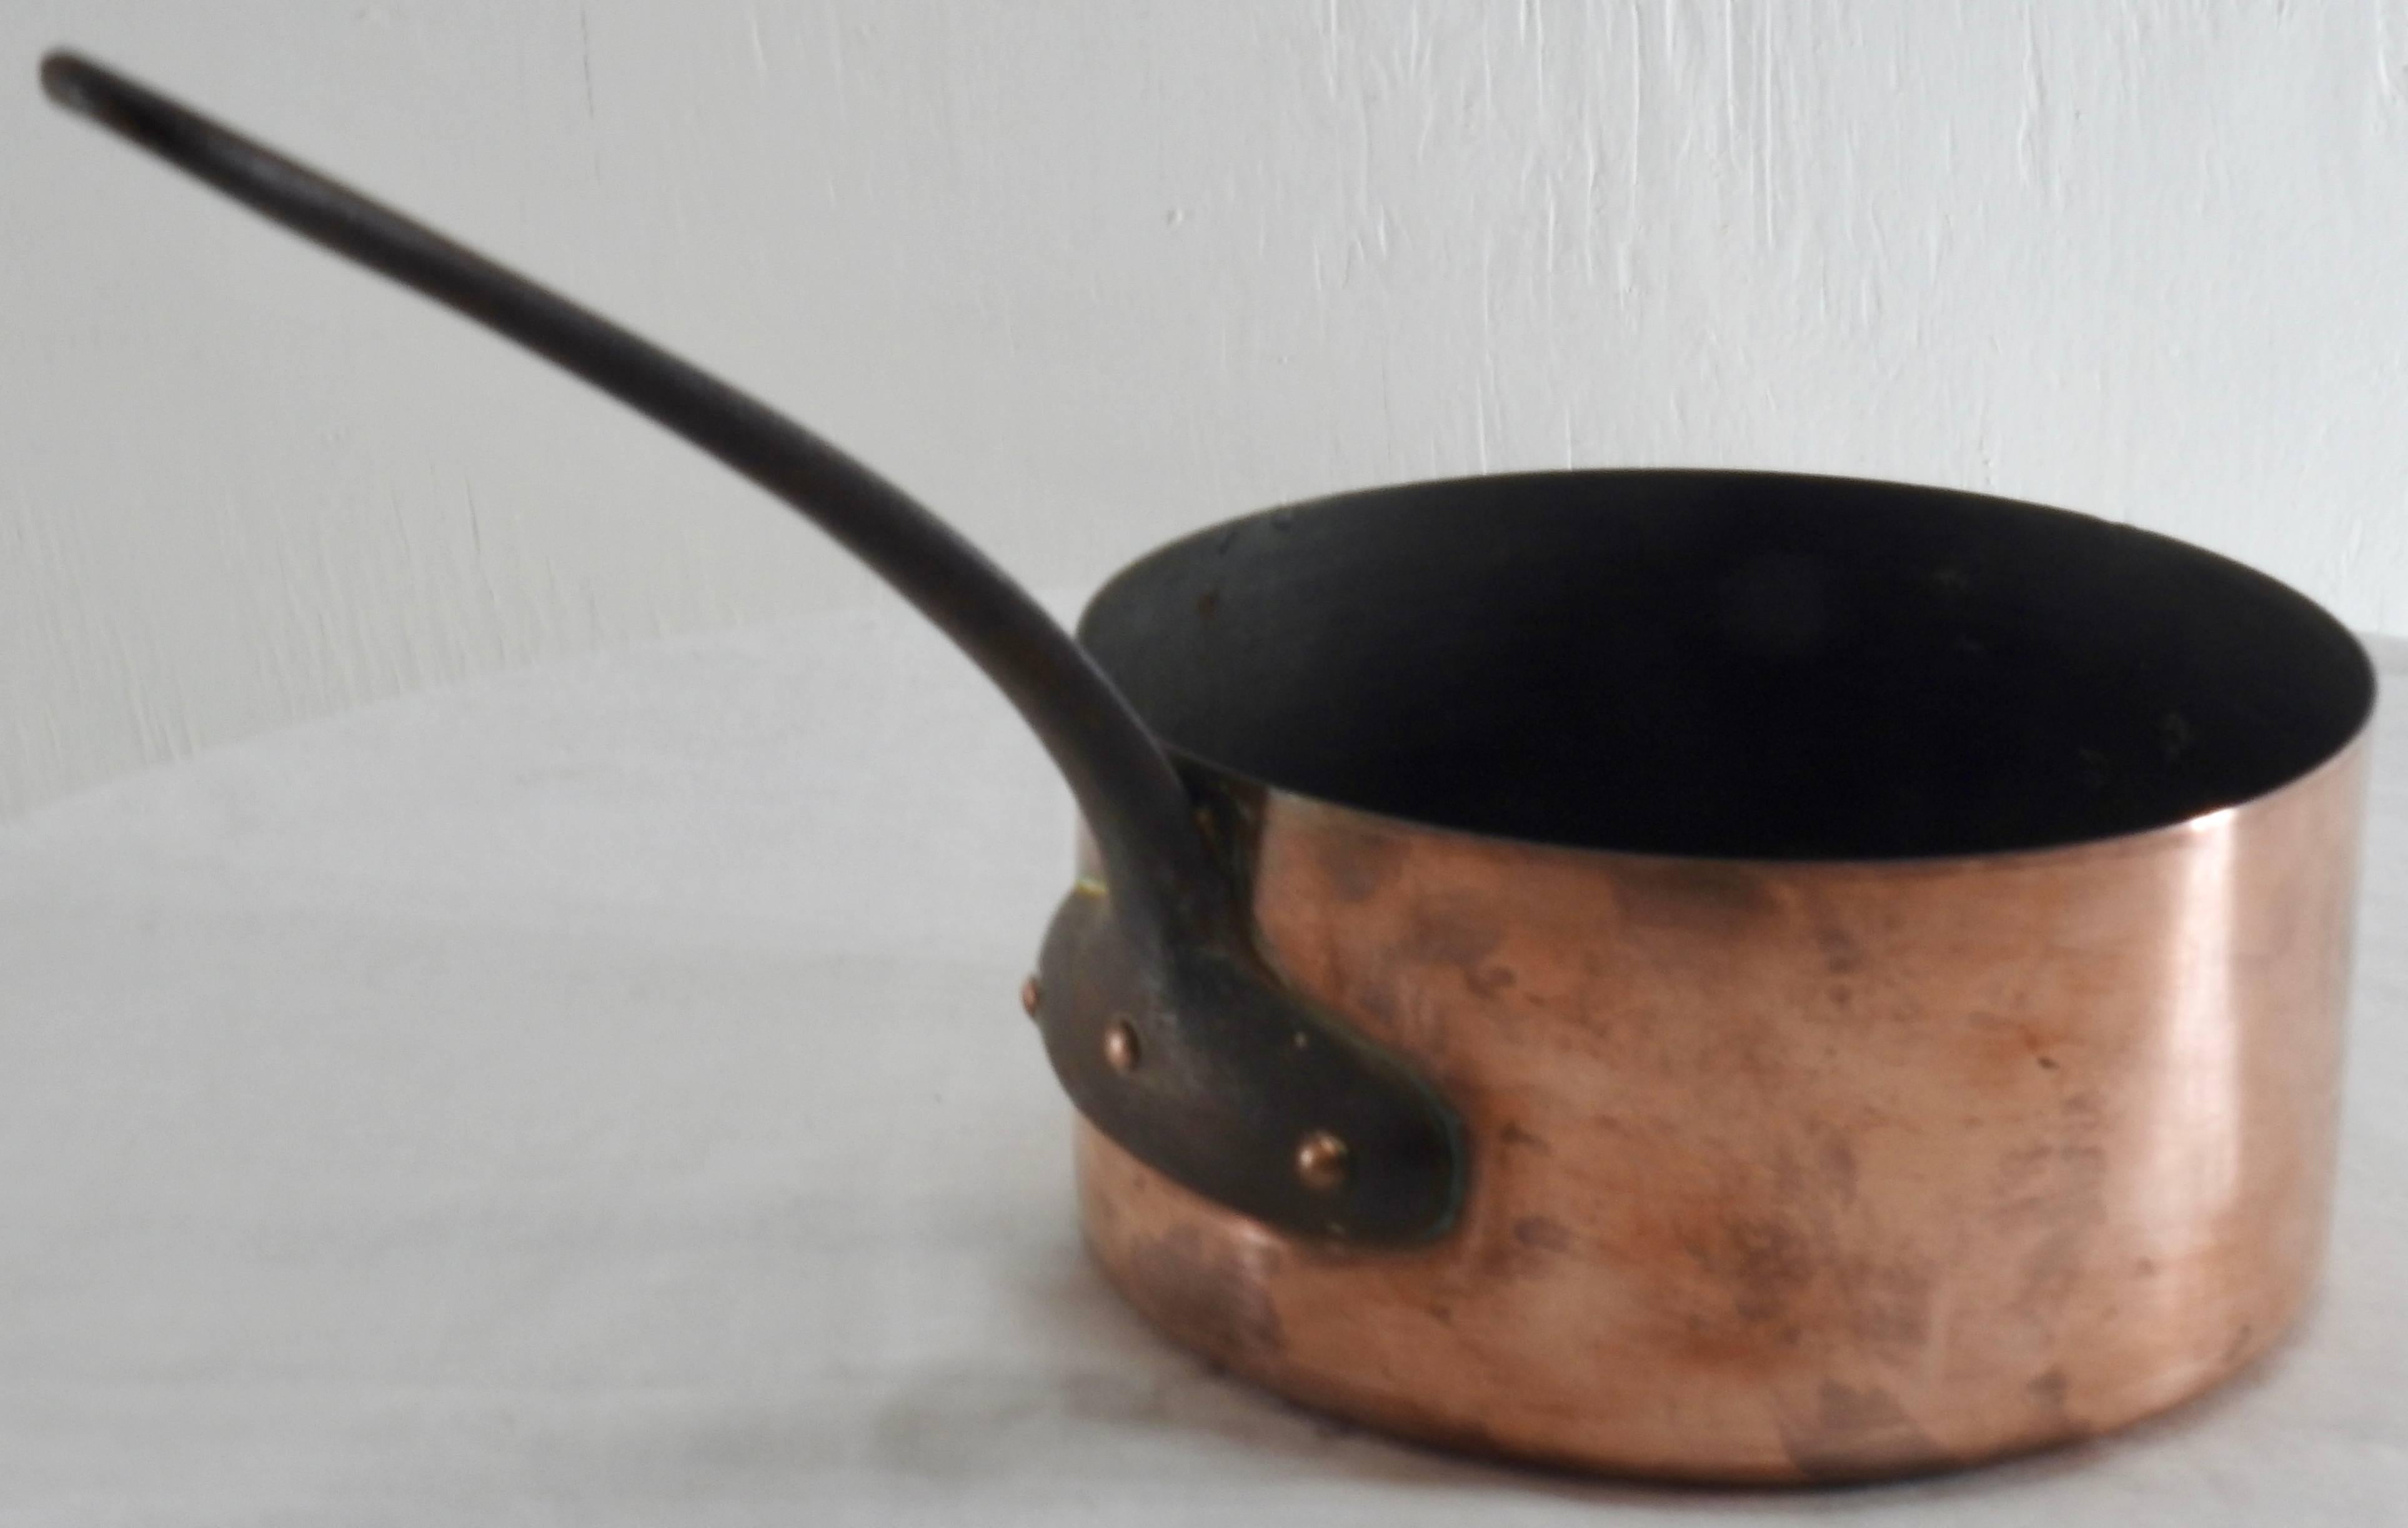 French small copper stock pan from France. Hand forged with a cast iron handle. Very heavy with a nice aged patina.

Measures: Handle length 6.75.